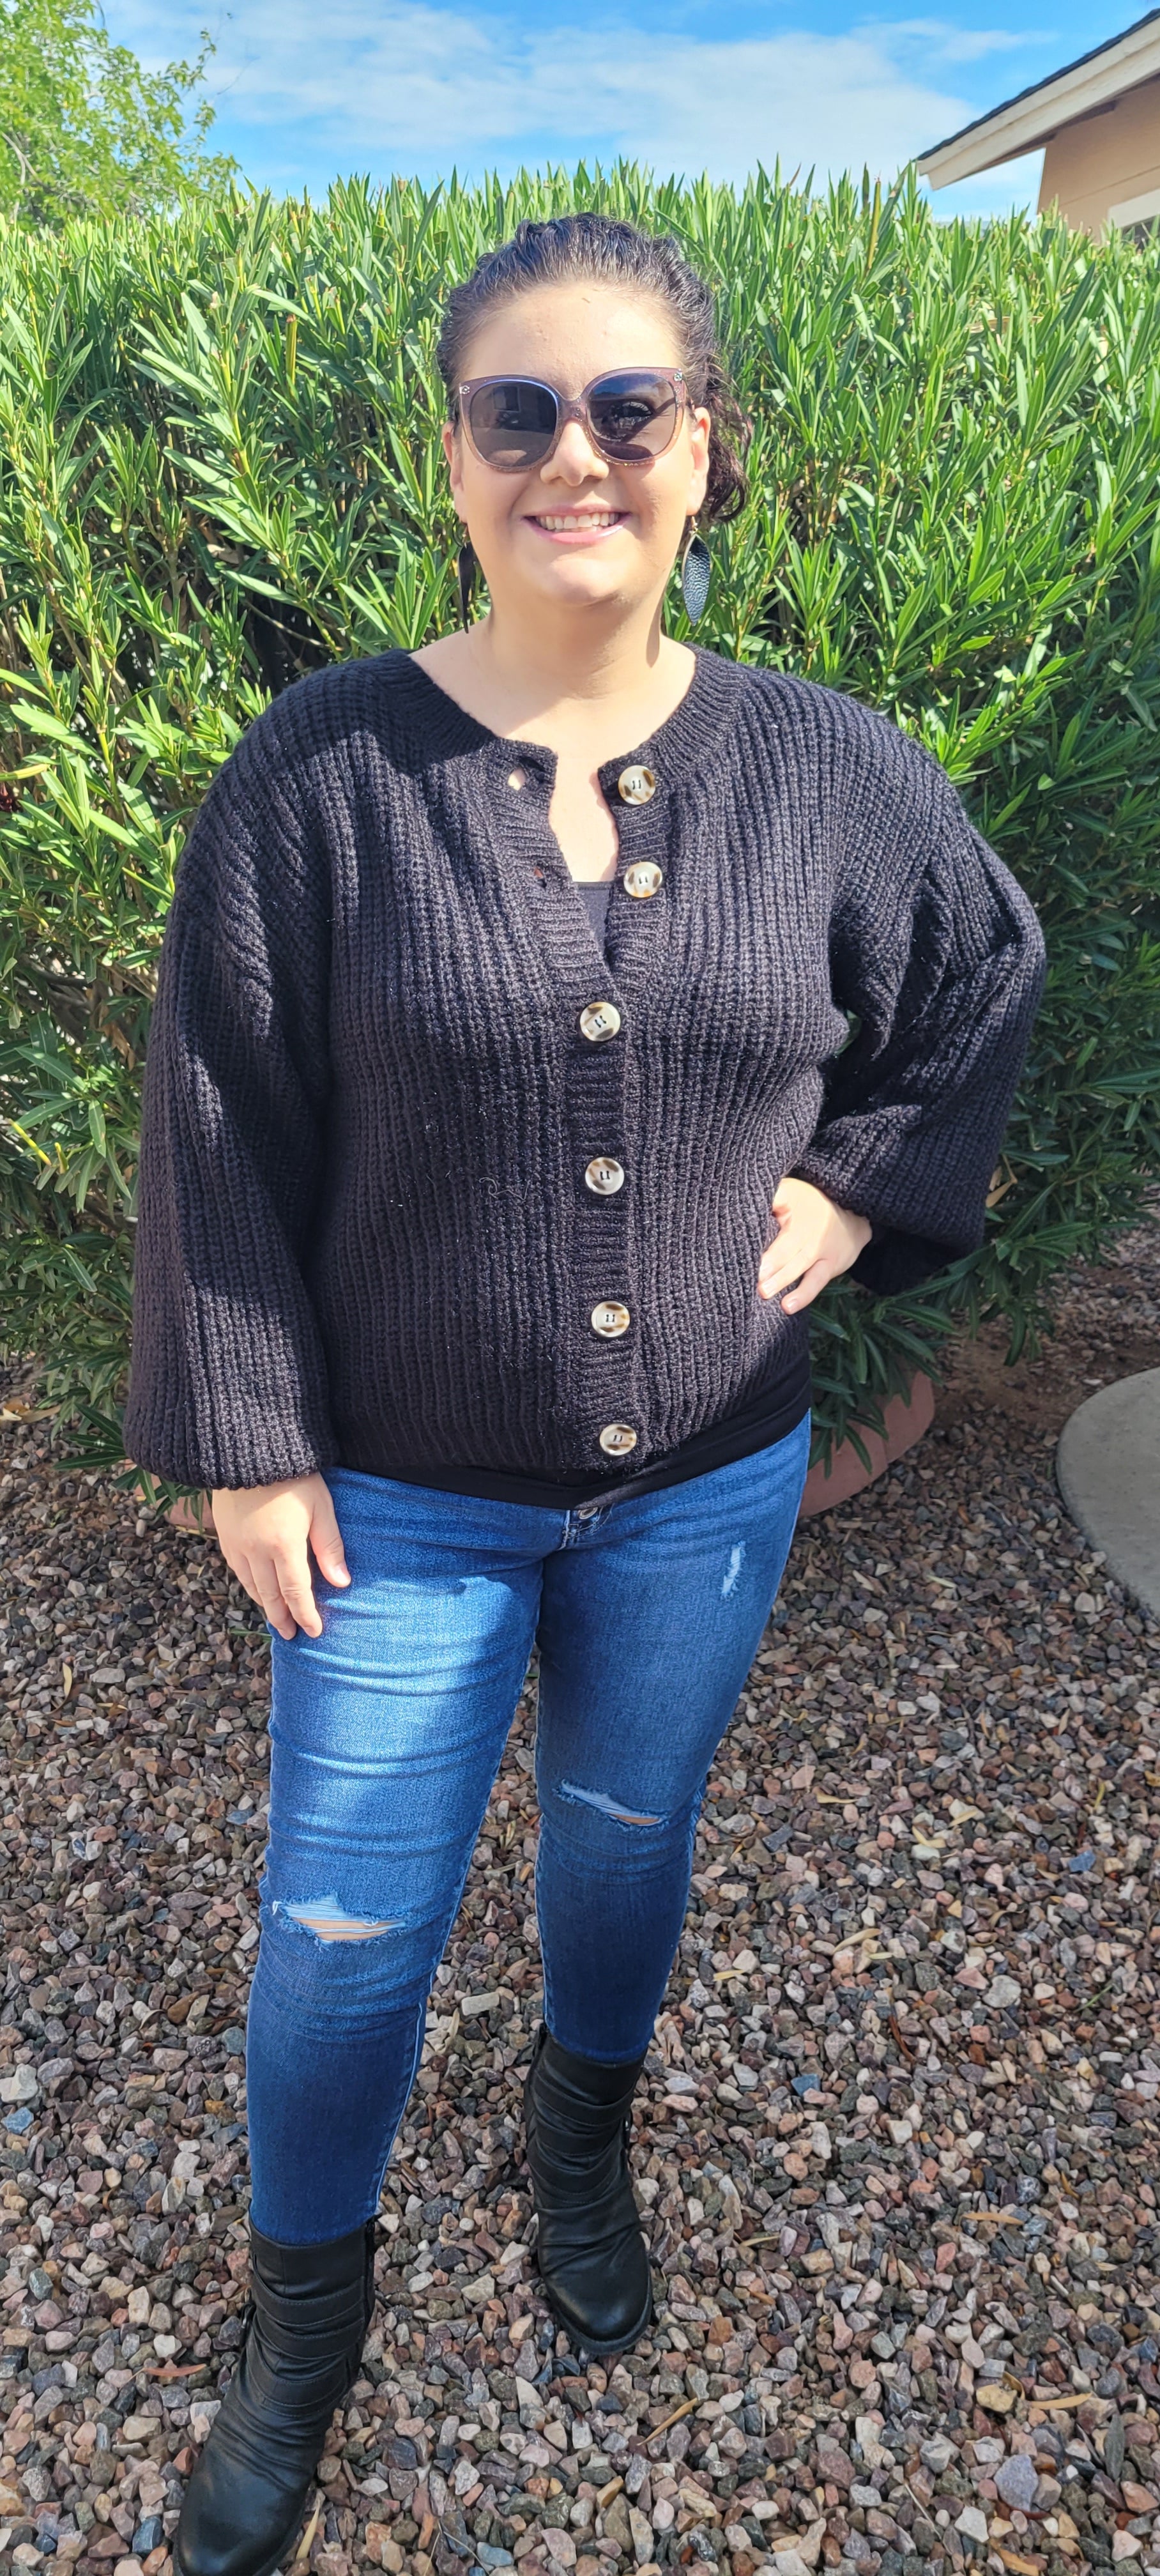 Who says you can’t look fabulous in a basic black sweater! This black cardigan features a button down front with balloon sleeves, and cinched cuffs and hemline. Nice thick sweater material, you will be sure to stay warm. This sweater is very versatile, and can be dressed up, worn to the office, or everyday use. Sizes small through x-large.